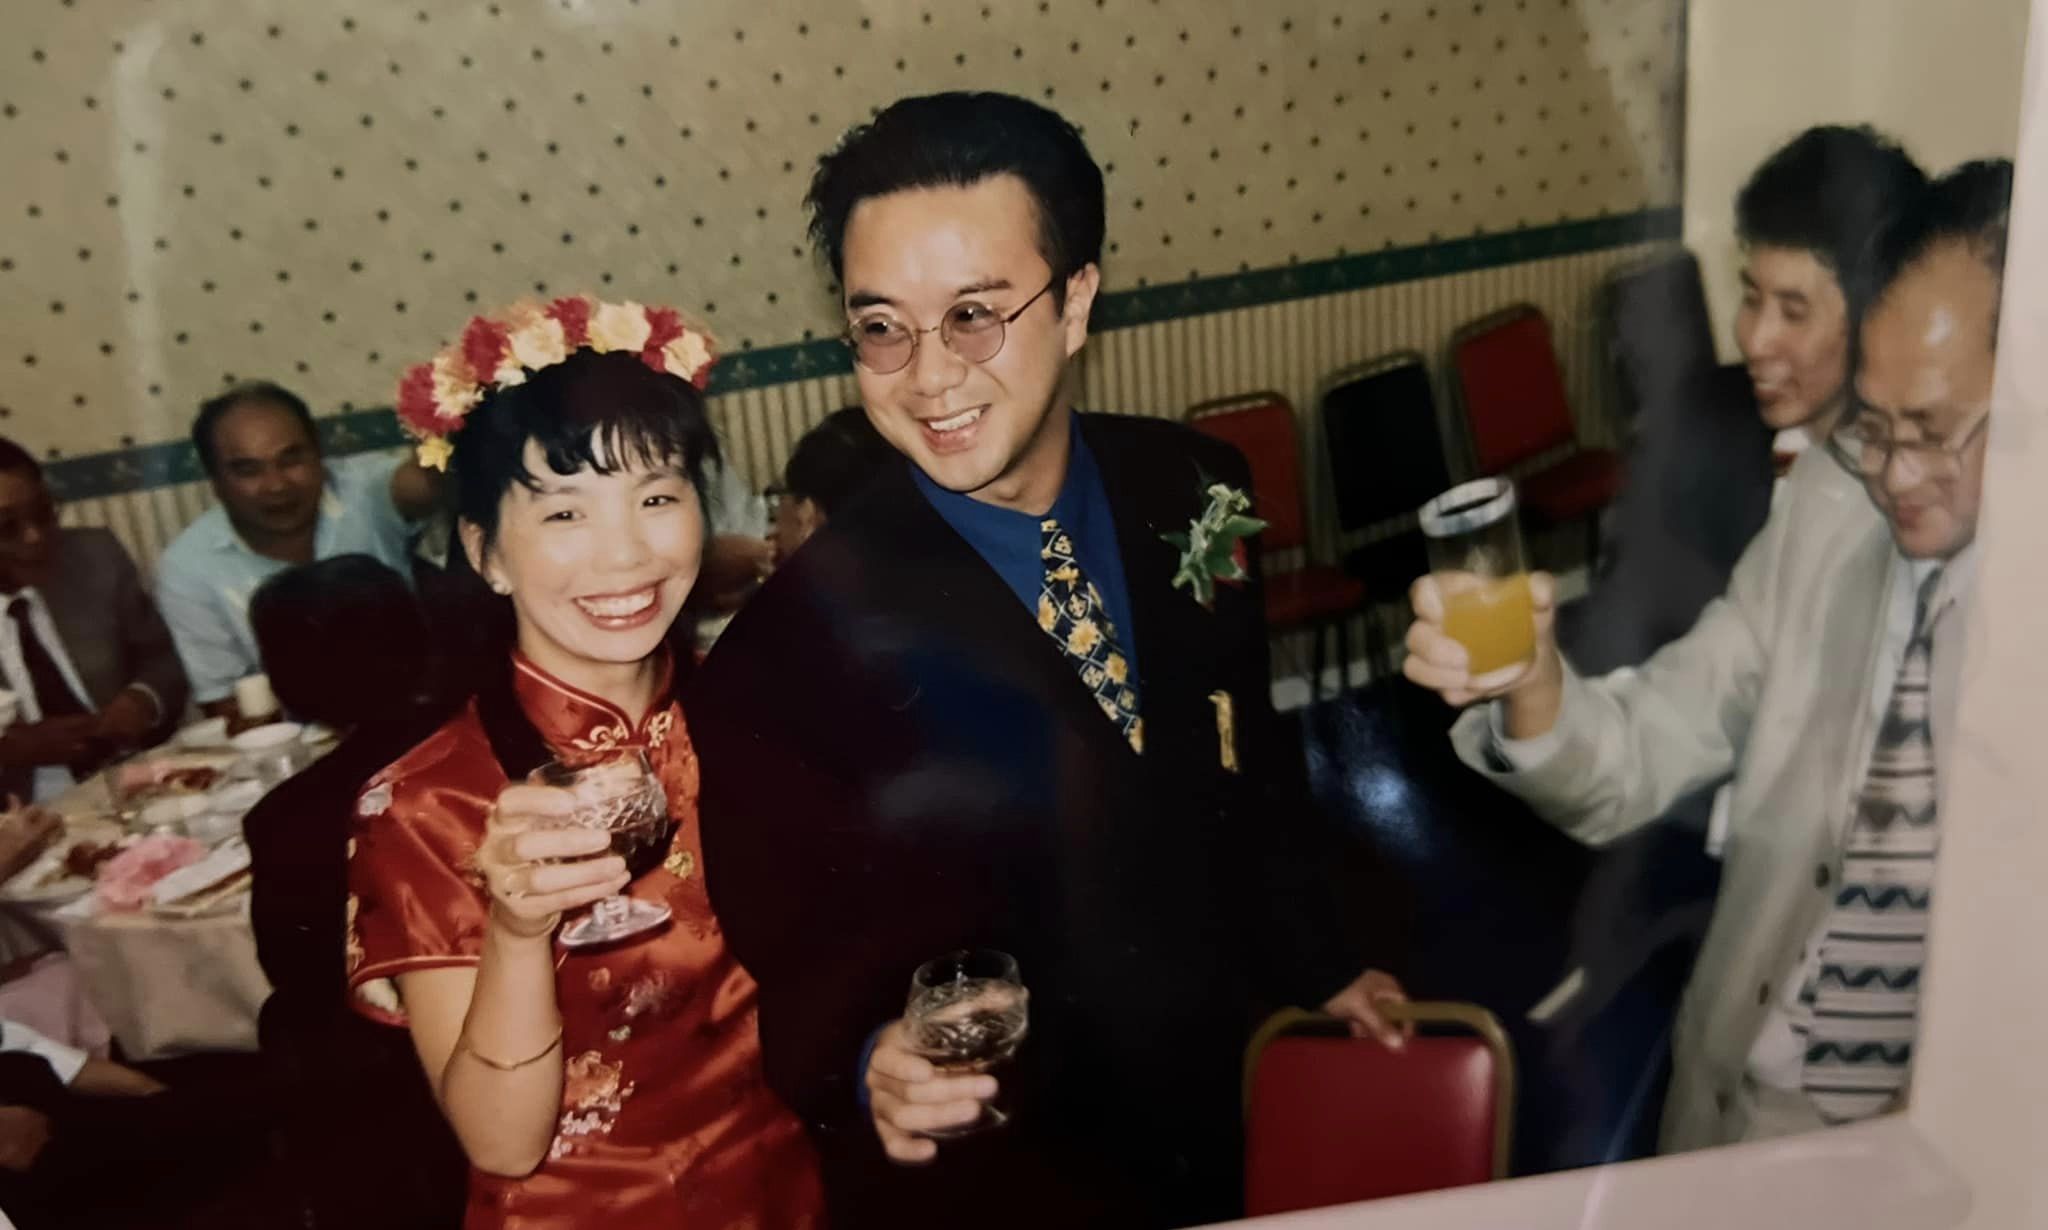 Angela and Gordon on their wedding, glasses in hand making a toast by a dining table of guests